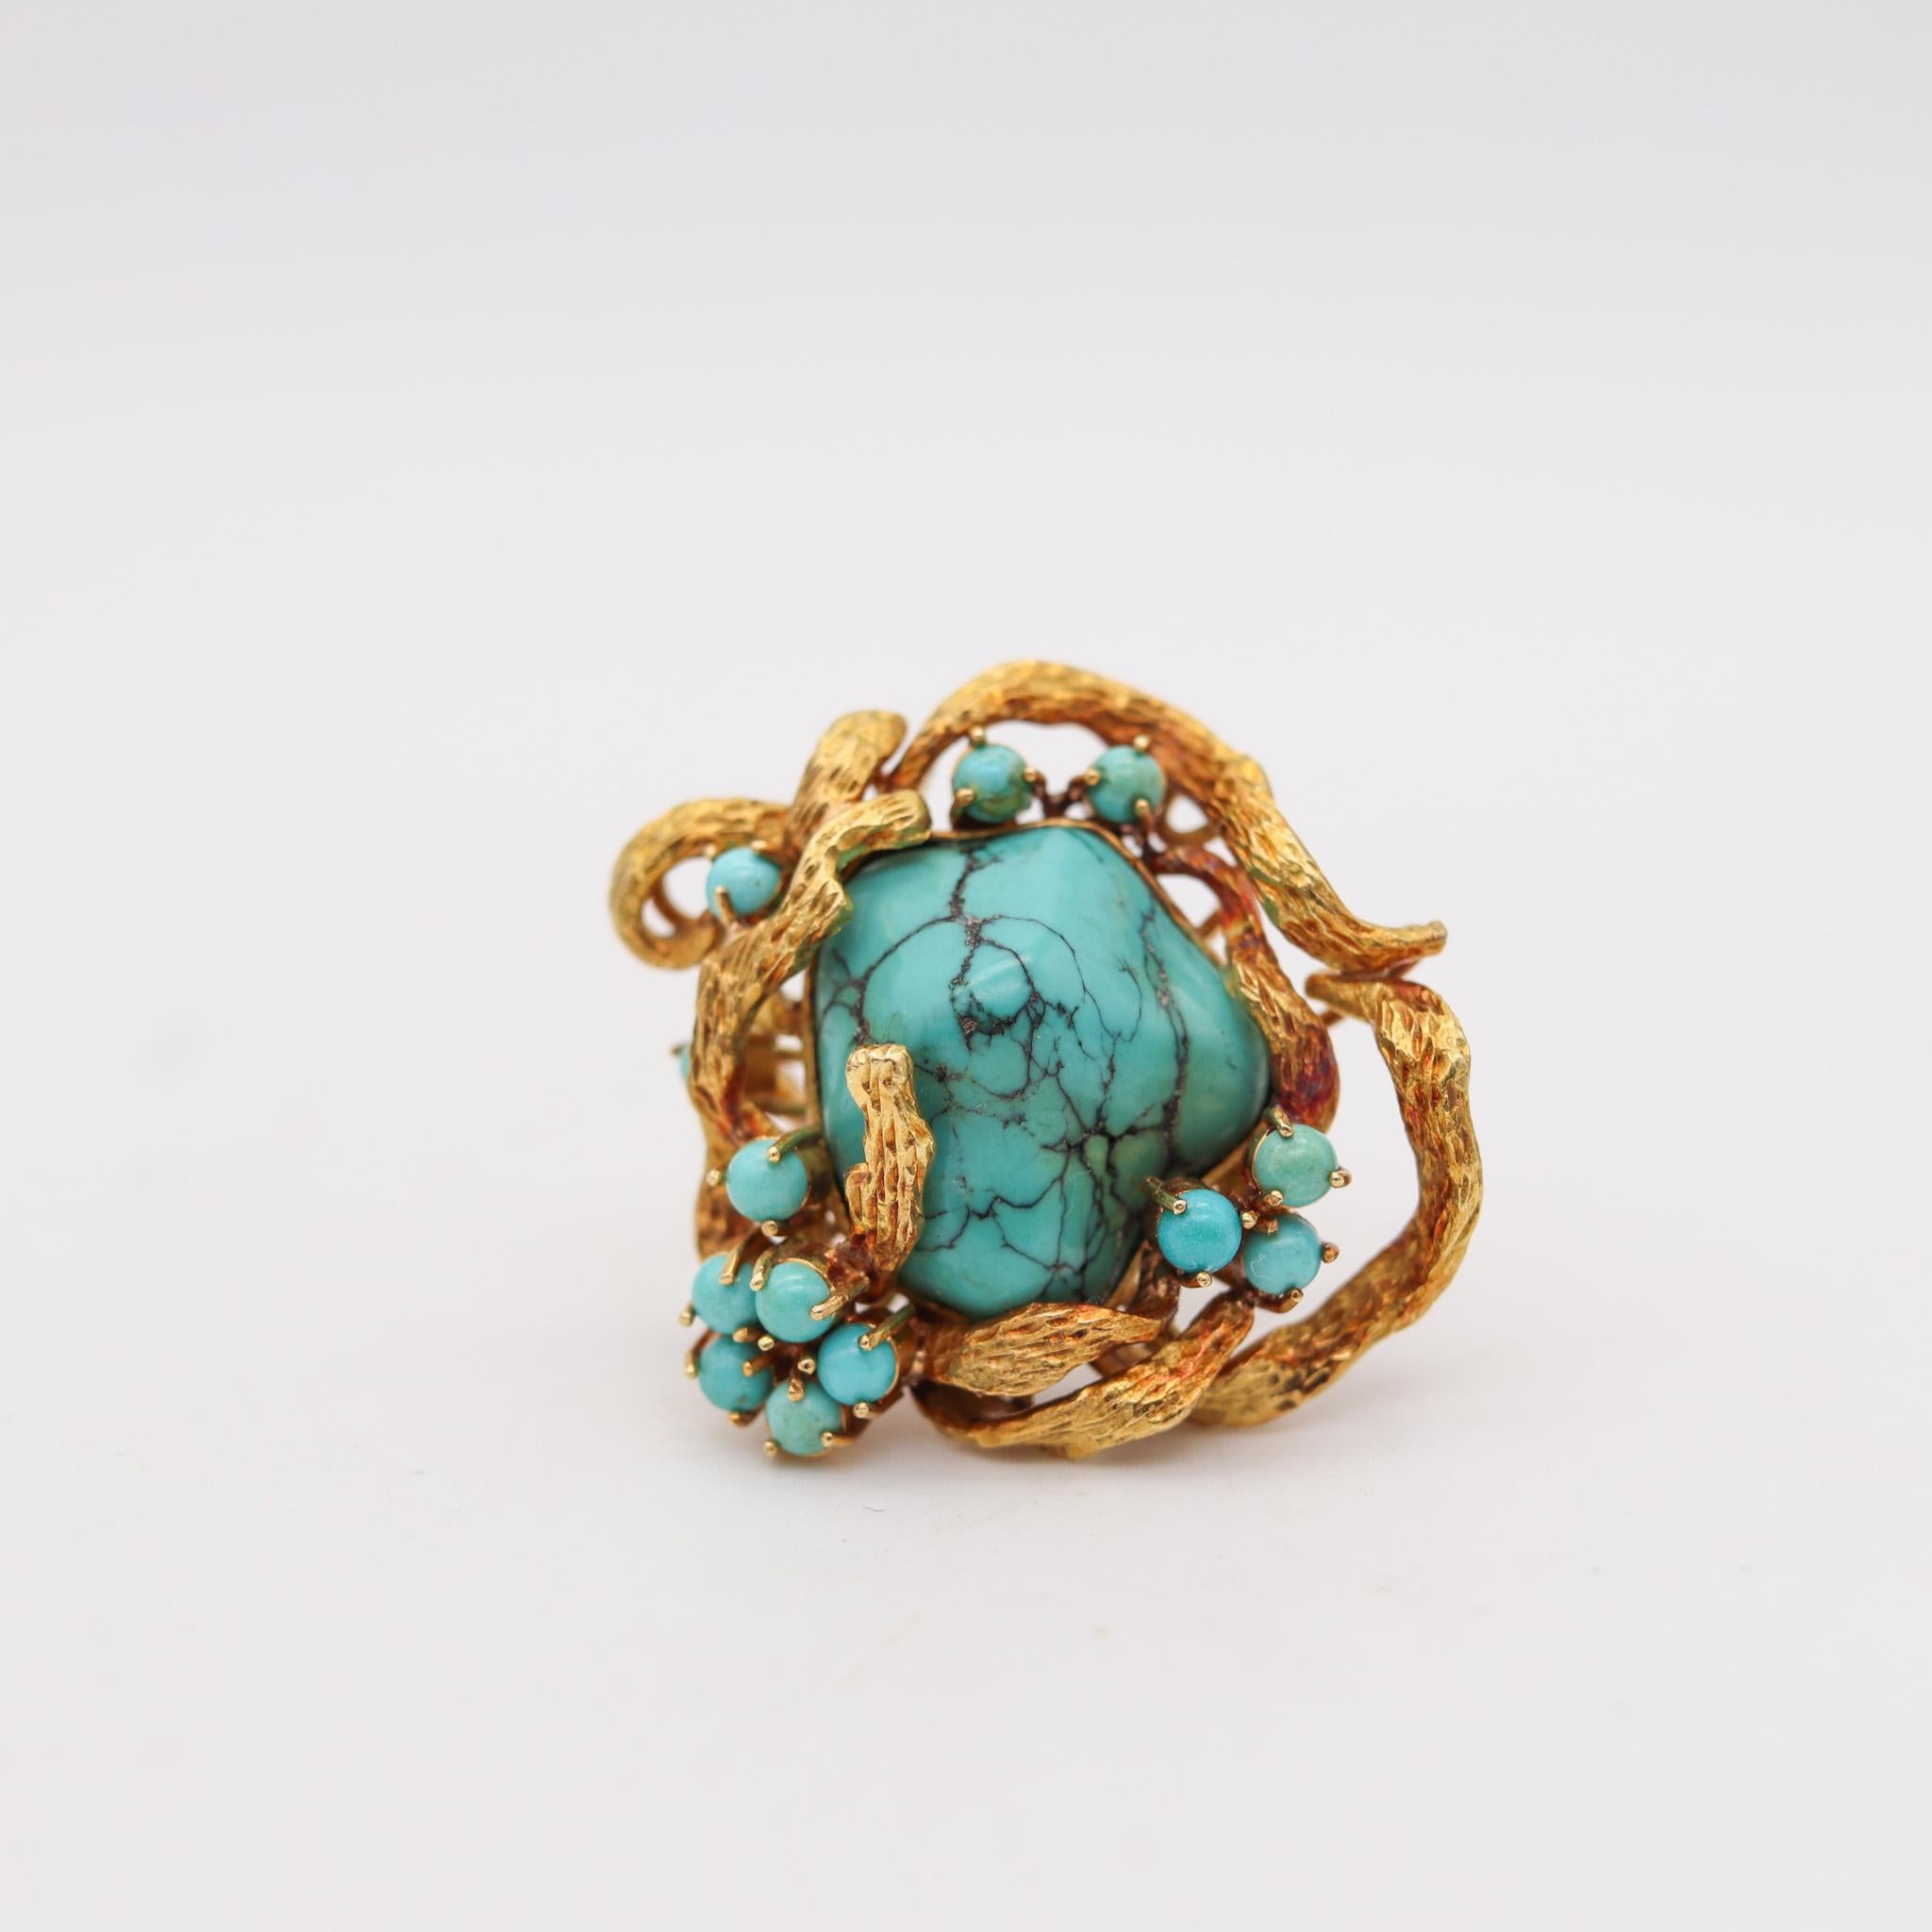 Retro modernist cocktail ring with turquoises.

A gorgeous sculptural cocktail ring, created with voluptuous organic free shapes during the mid-century period, back in the 1960. This ring is very beautiful and unusual and has been designed with